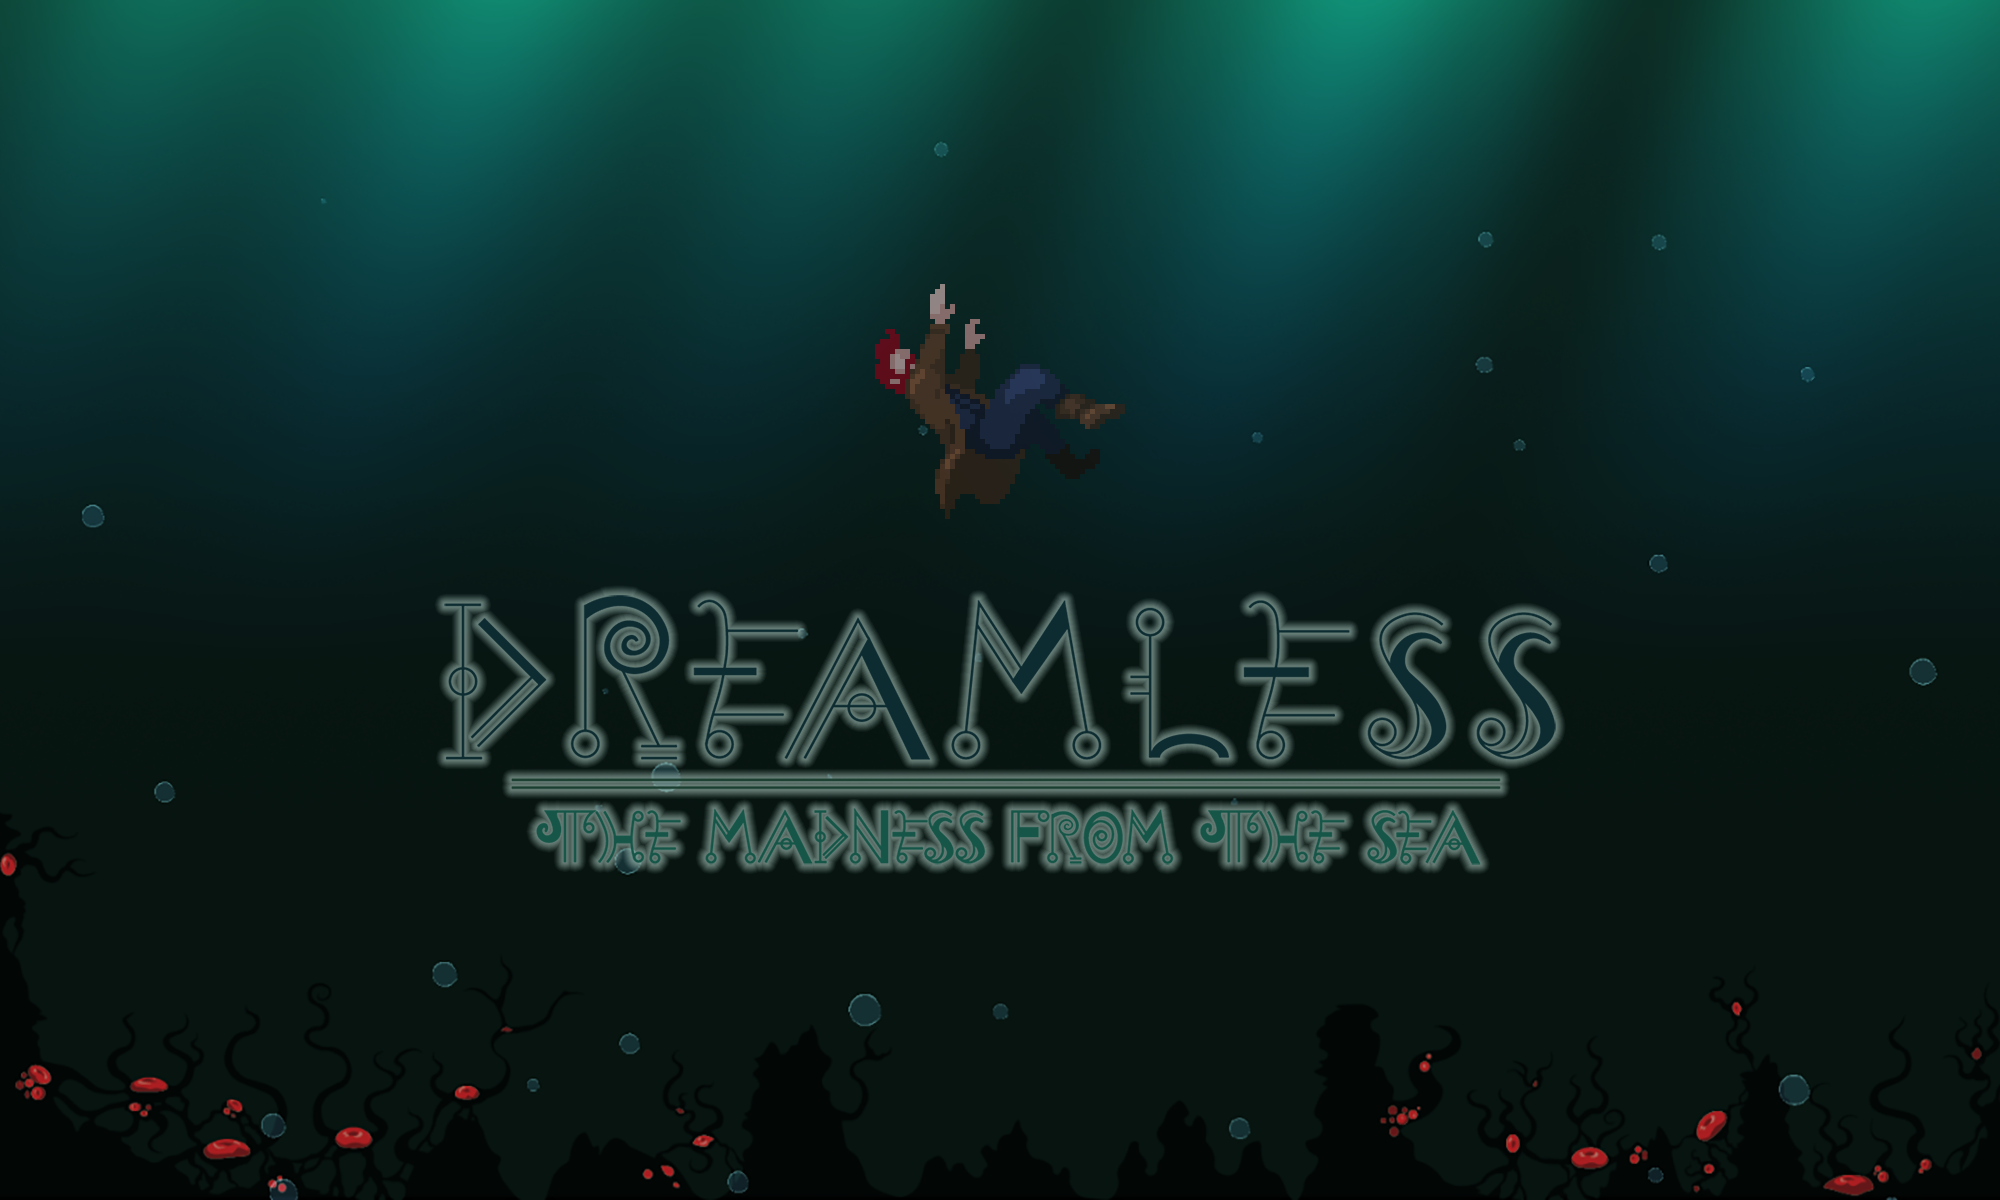 DREAMLESS: The Madness from the Sea